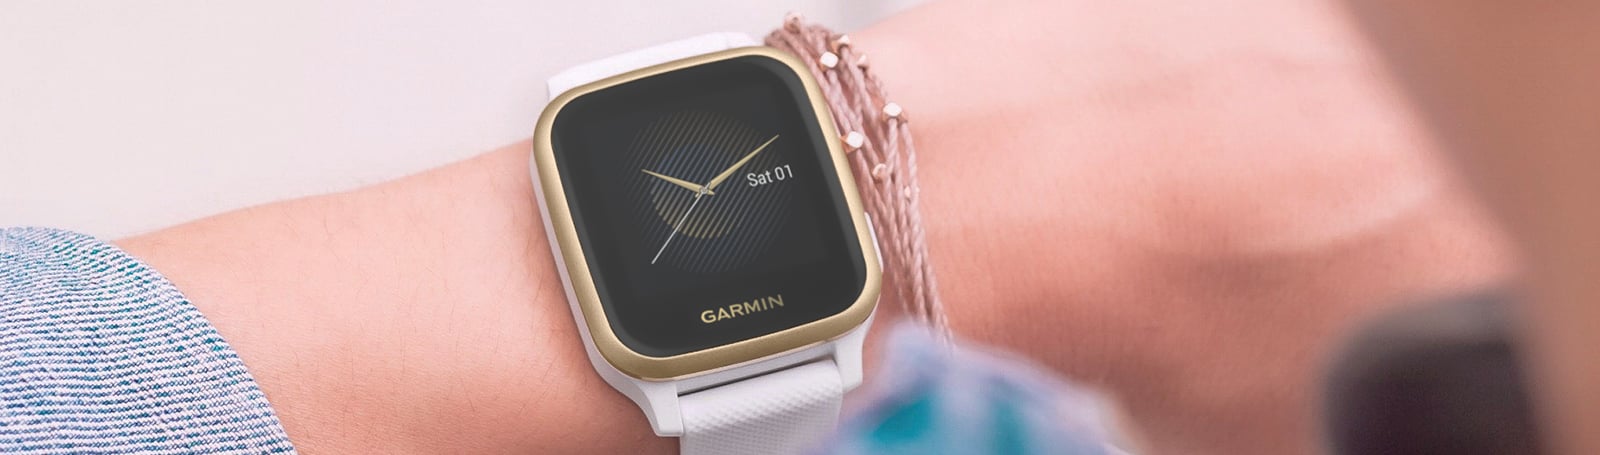 Features Music and Up to 6 Days of Battery Life Light Gold and Navy Blue GPS Smartwatch with Bright Touchscreen Display Garmin Venu Sq Music